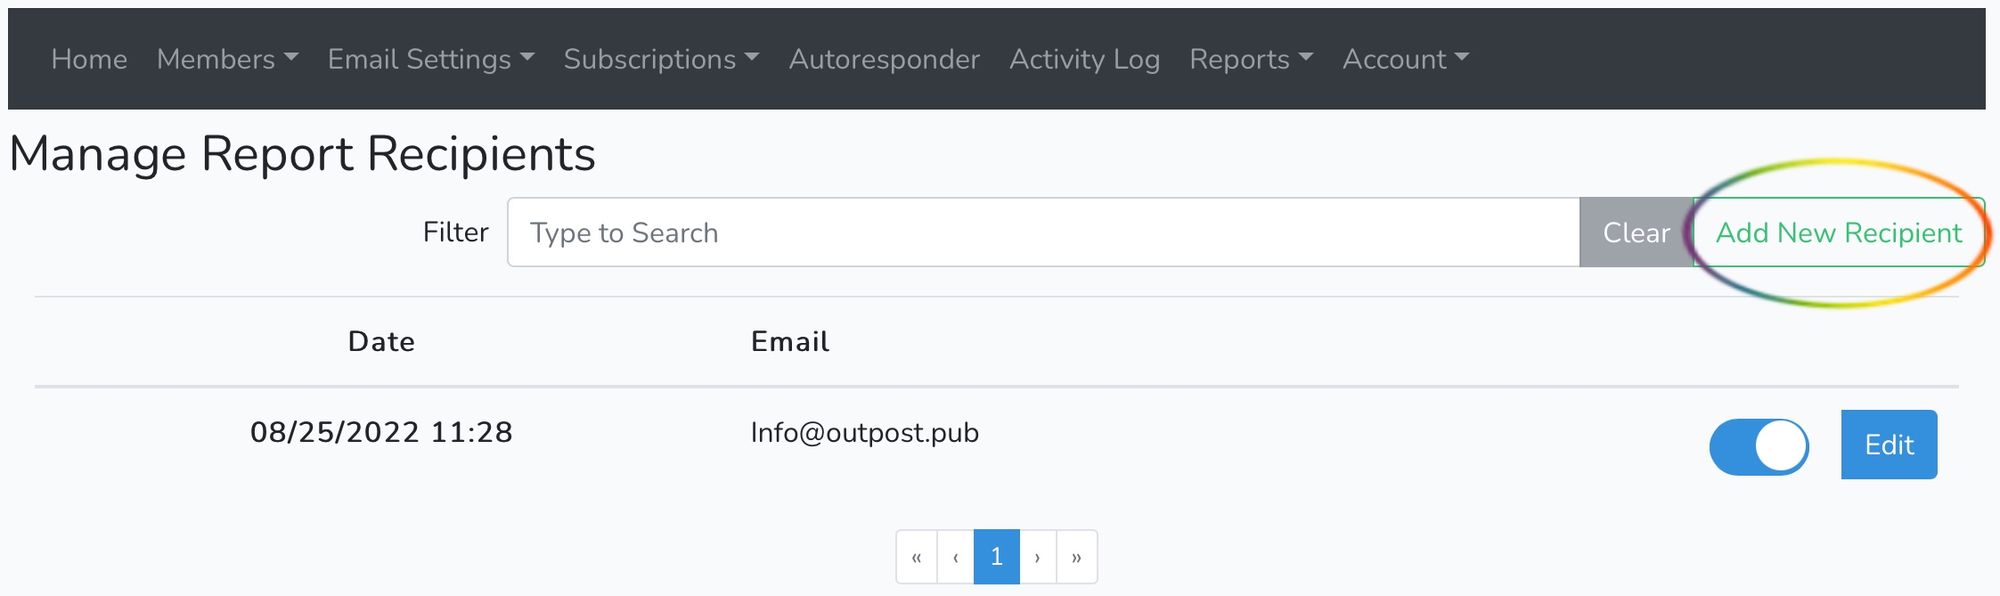 Screenshot of Manage Report Recipients page